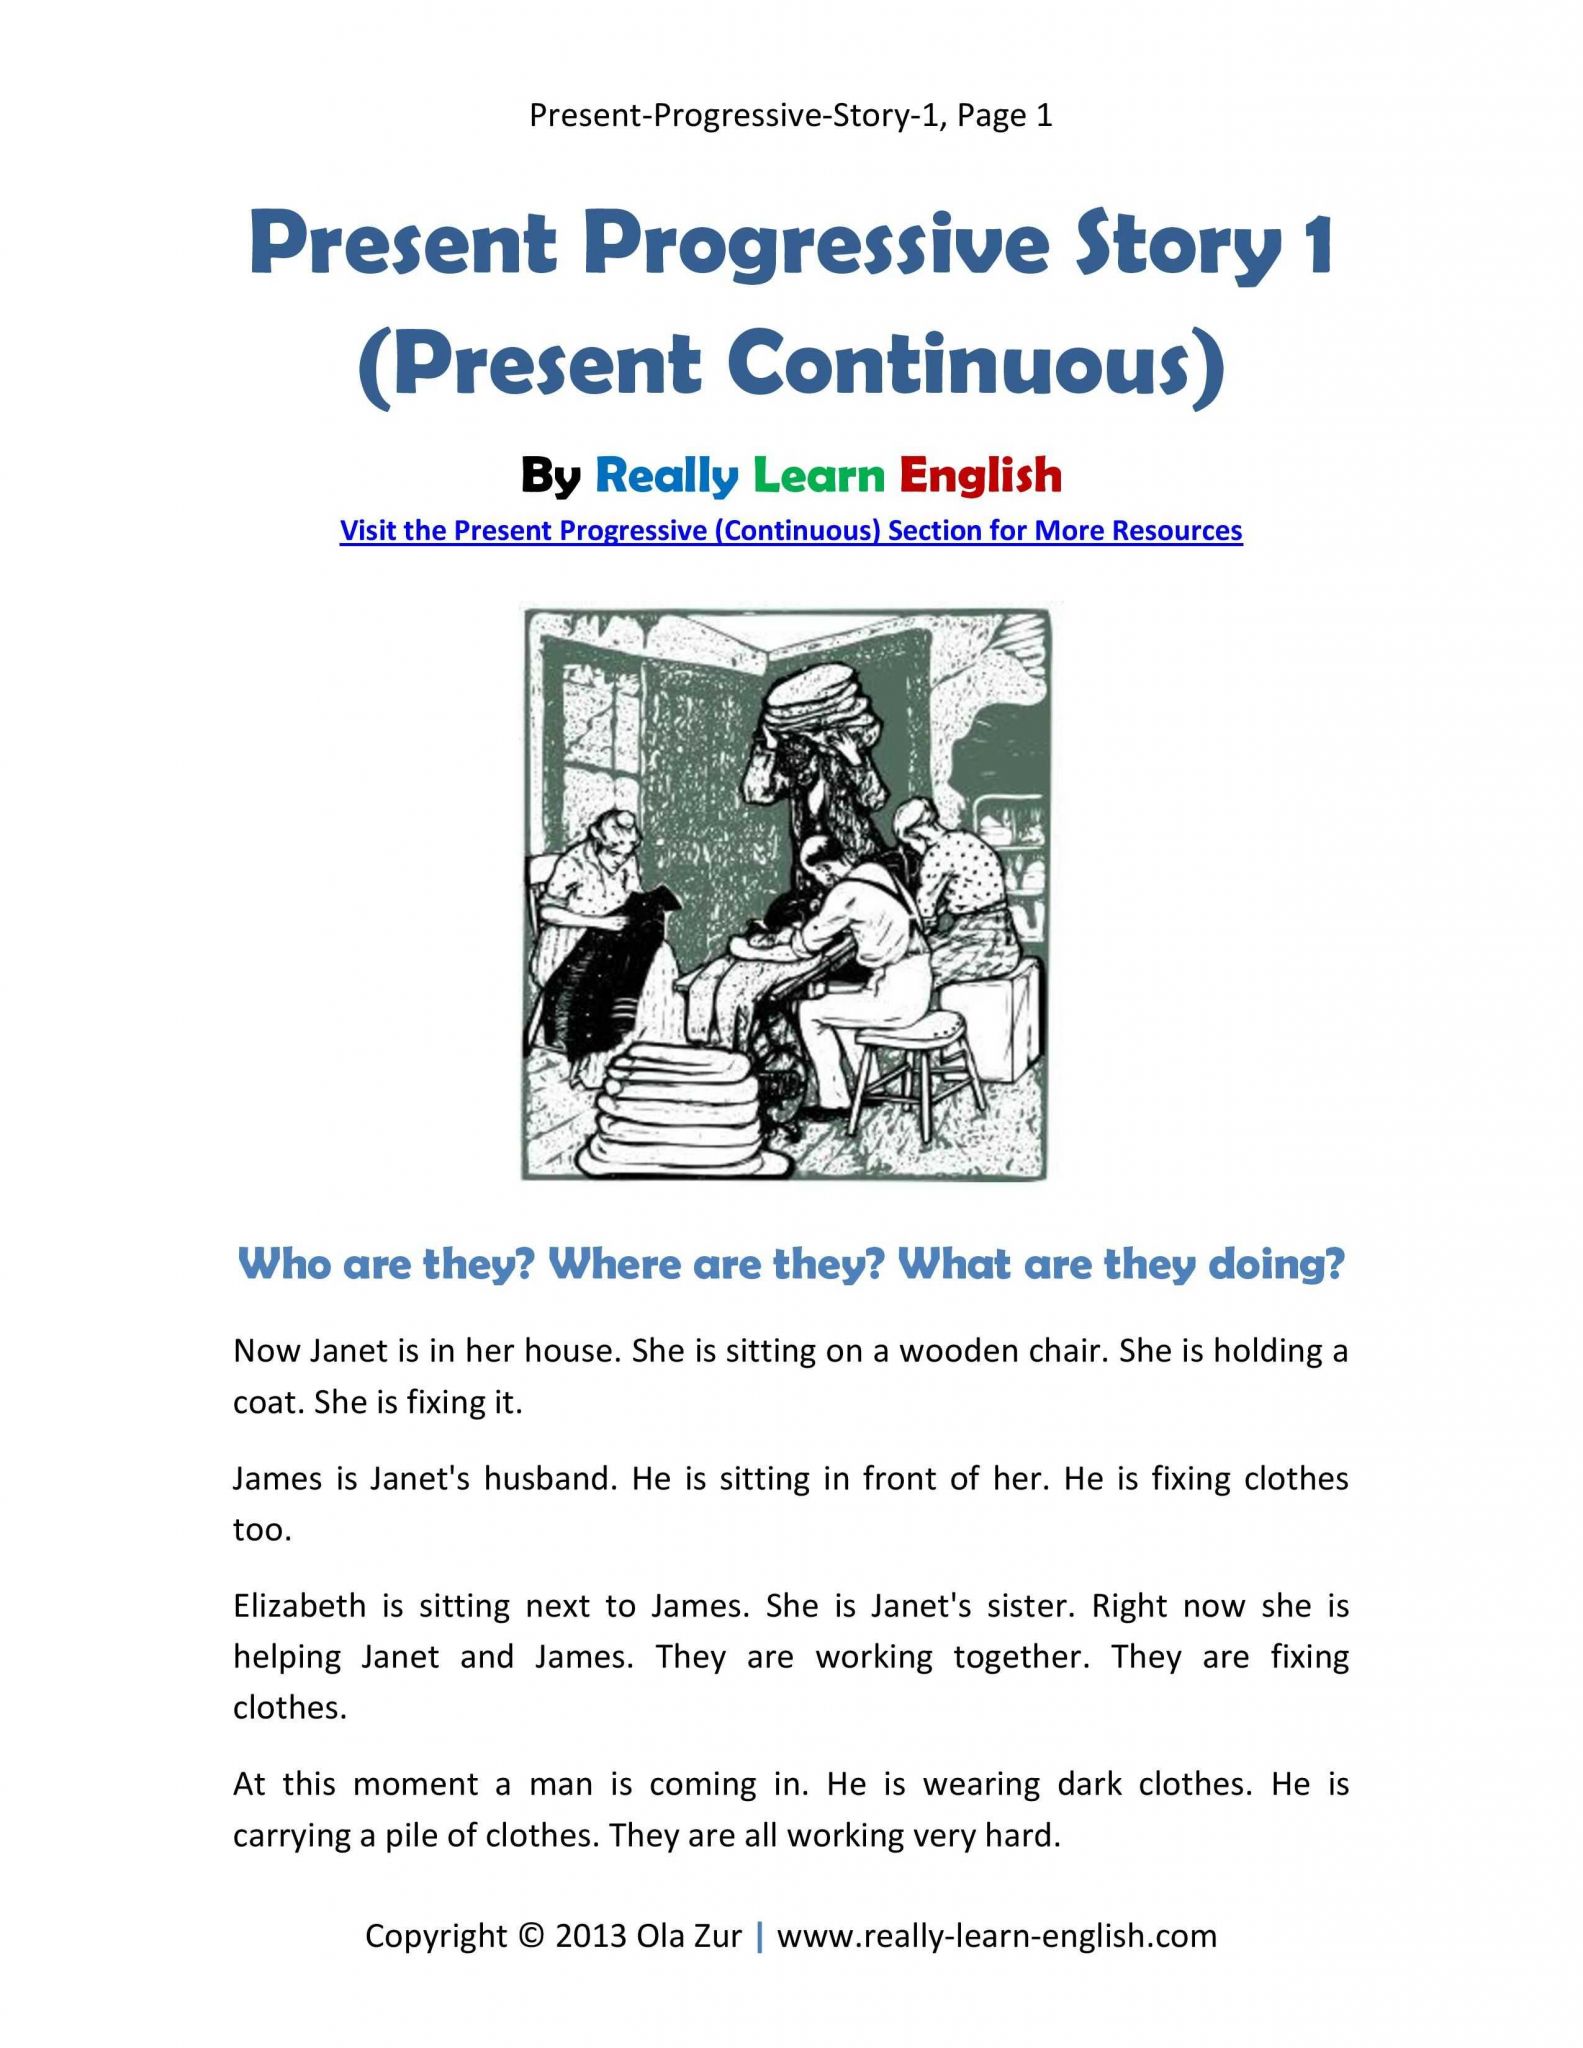 Present Progressive Worksheets as Well as Free Printable Story and Exercises to Practice the Present